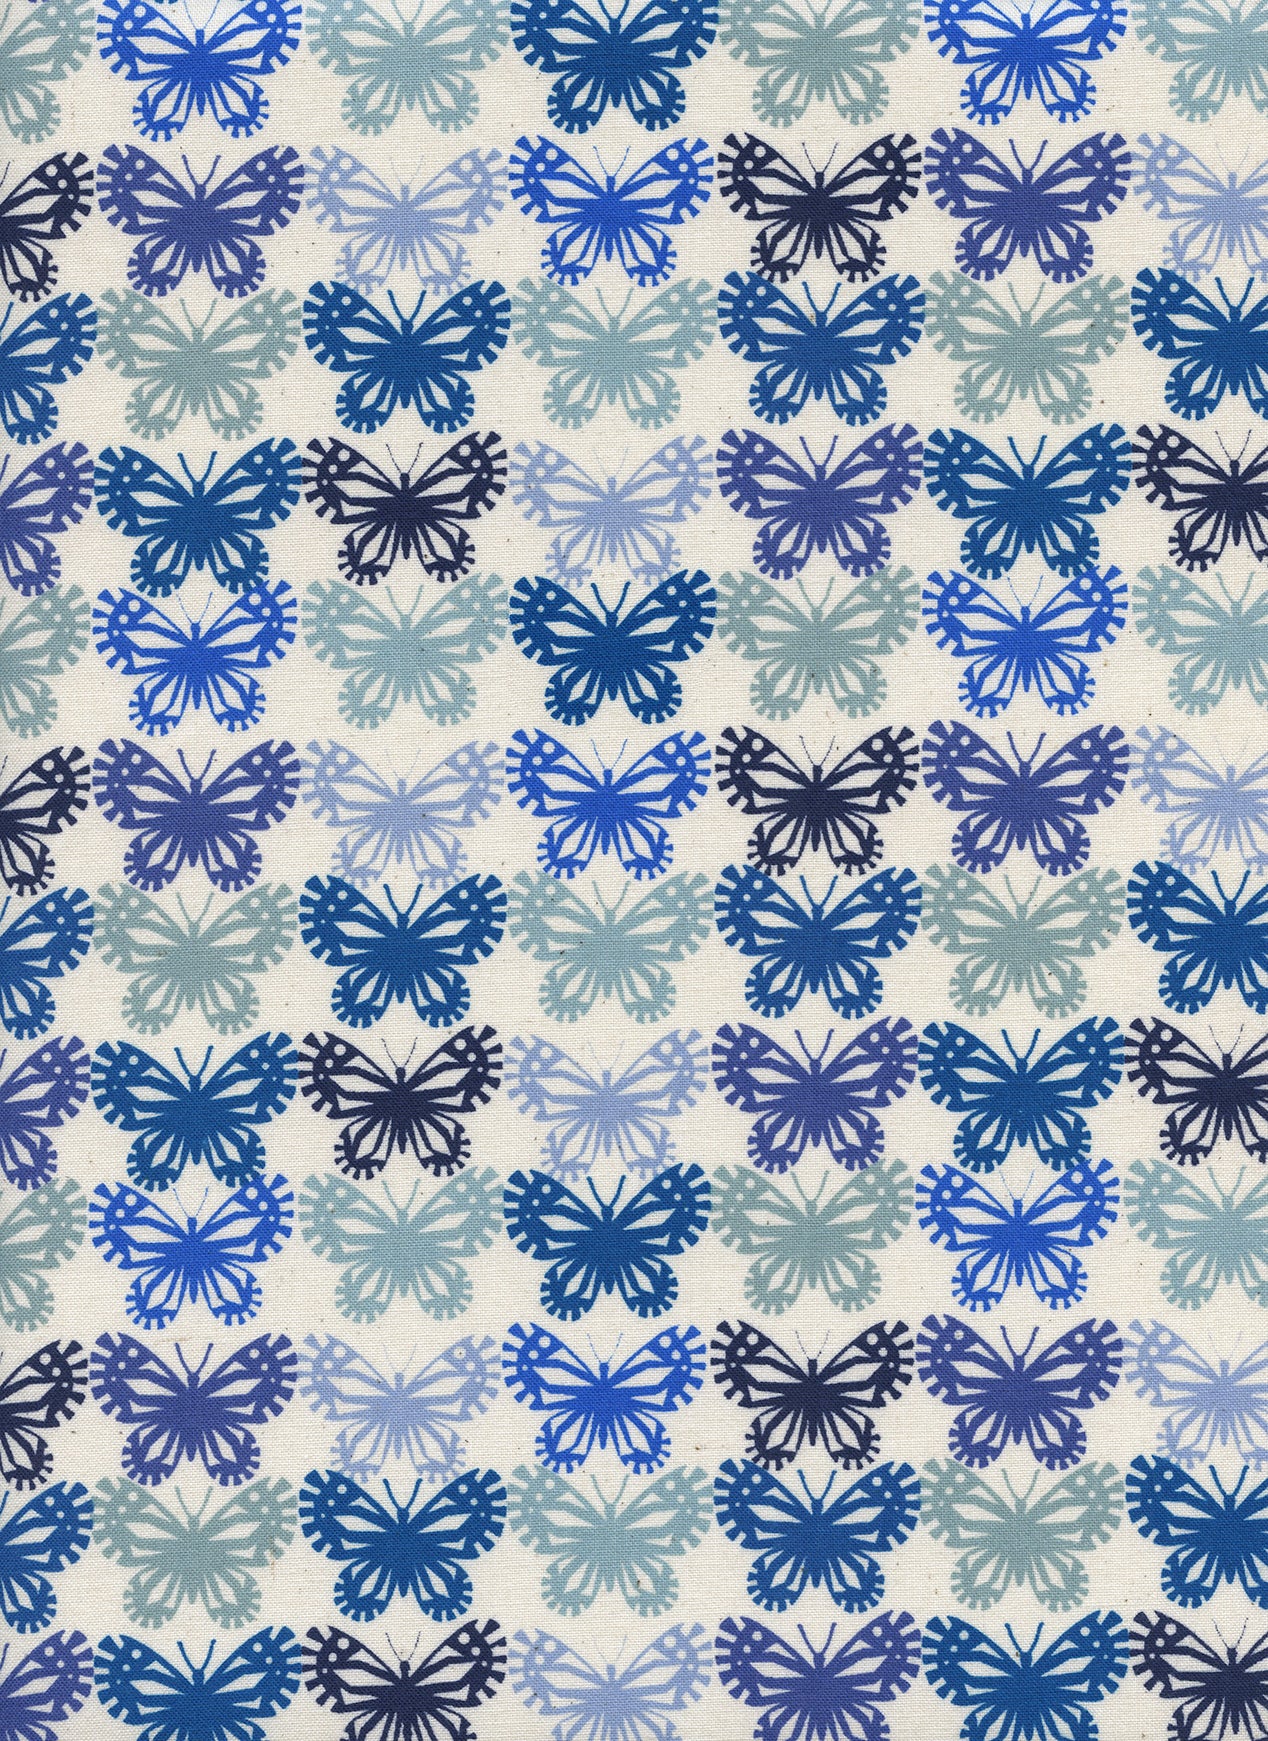 C+S Panorama - Butterflies - Blue Ribbon Unbleached Cotton Fabric